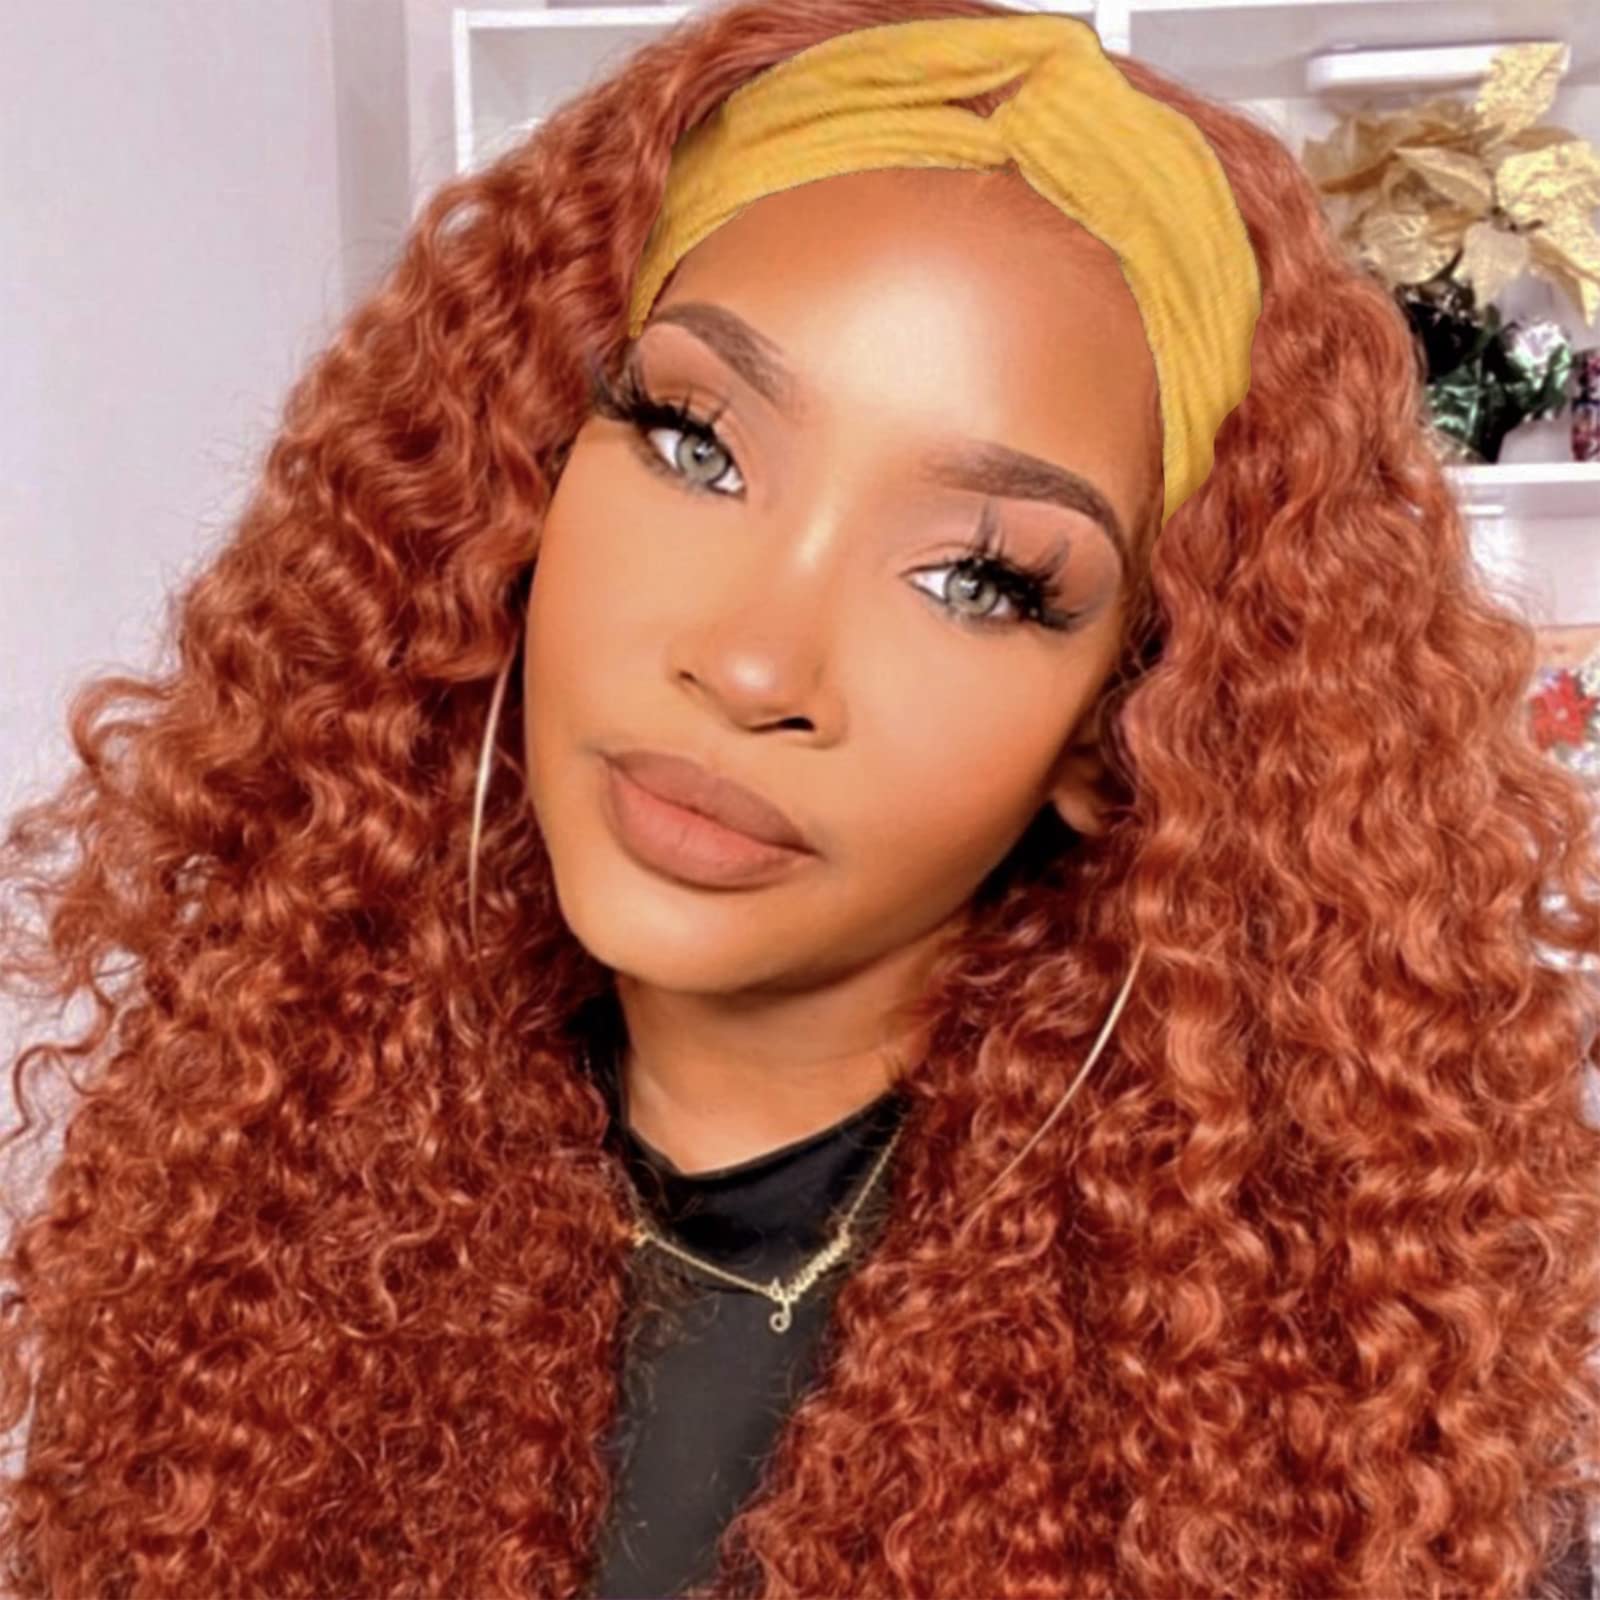 Headband Wigs for Black Women Ginger Orange Short Curly Wigs for Women No  Lace Front Wig Coloful 350 Afro Curly Headband Wig Heat Resistant Fiber Hair  Cosplay Wig (12inch, 350) 12 Inch 350#